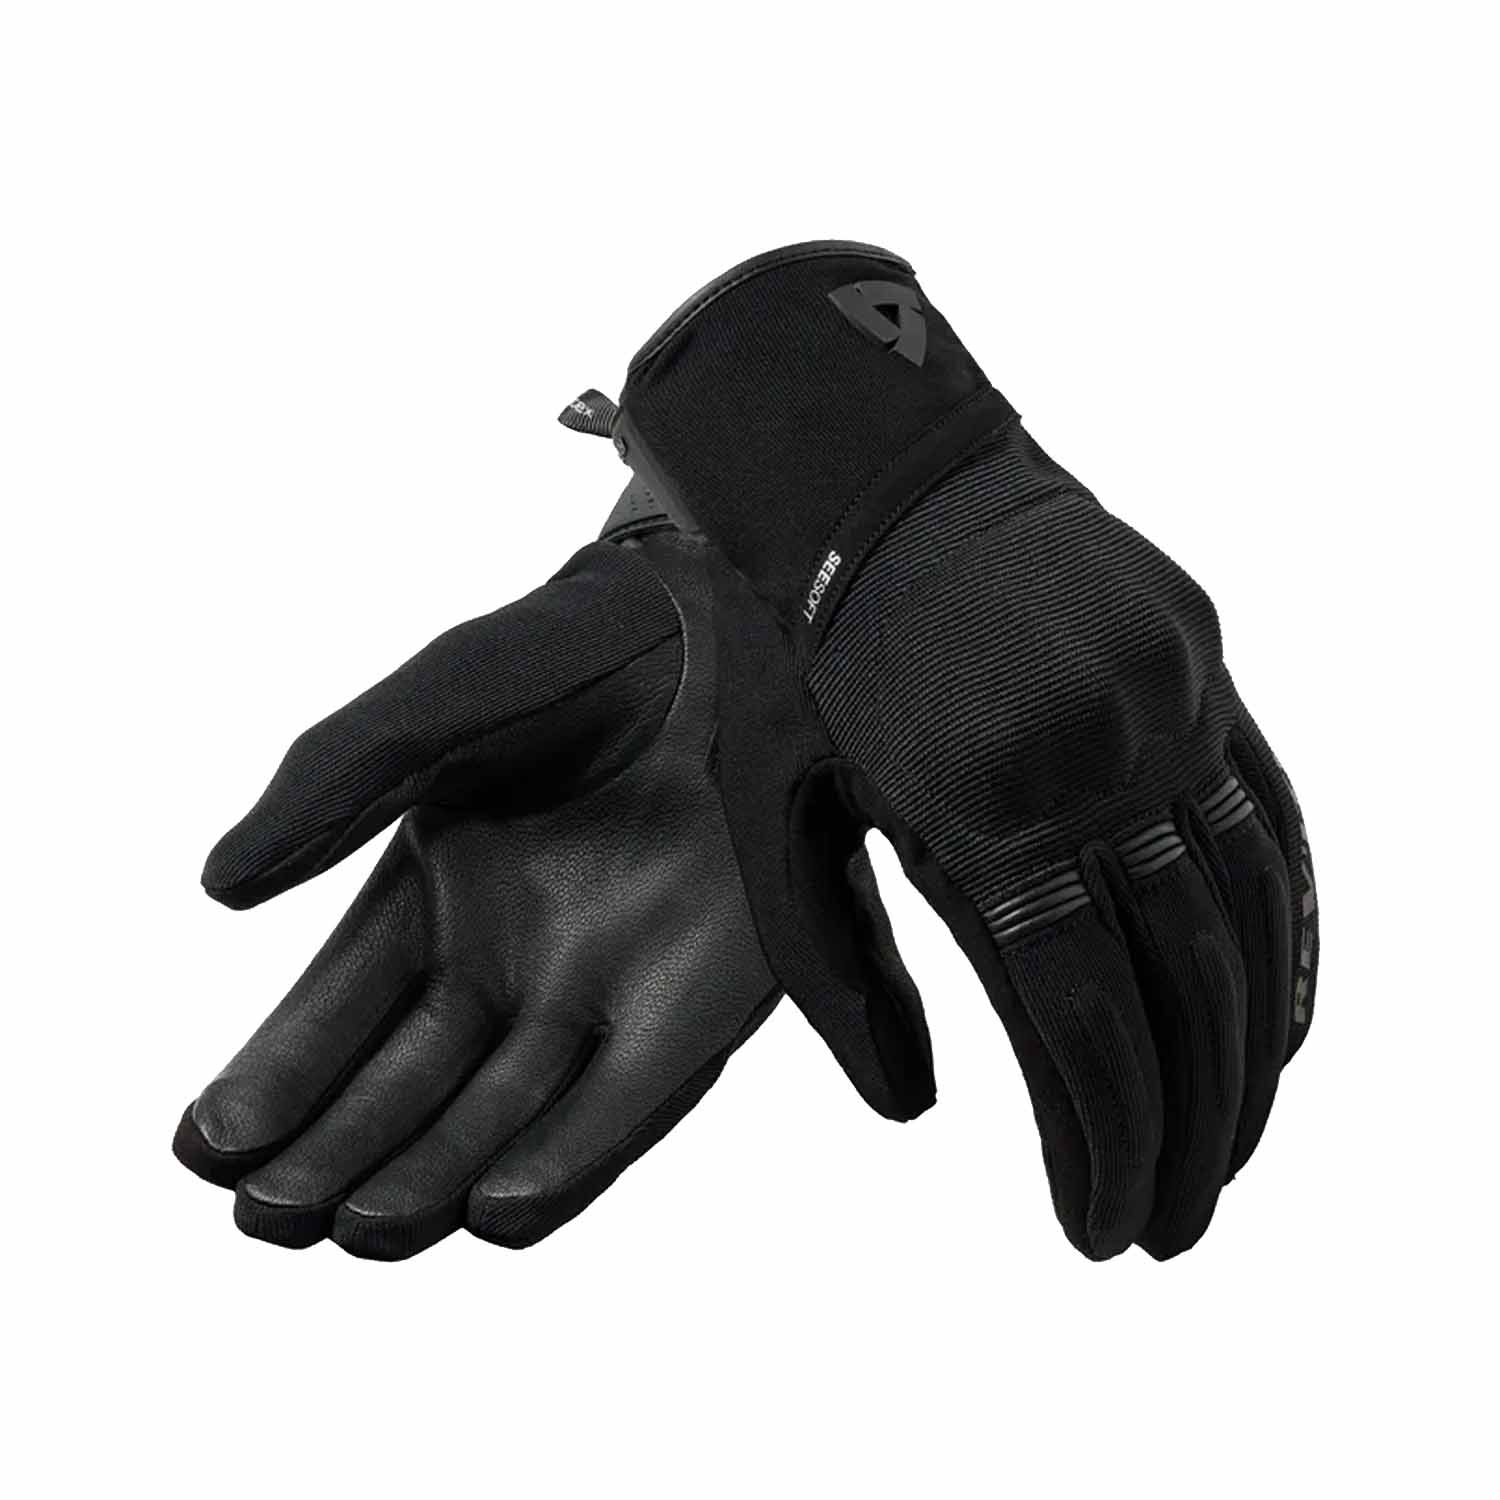 Image of REV'IT! Mosca 2 H2O Gloves Ladies Black Size L ID 8700001378086